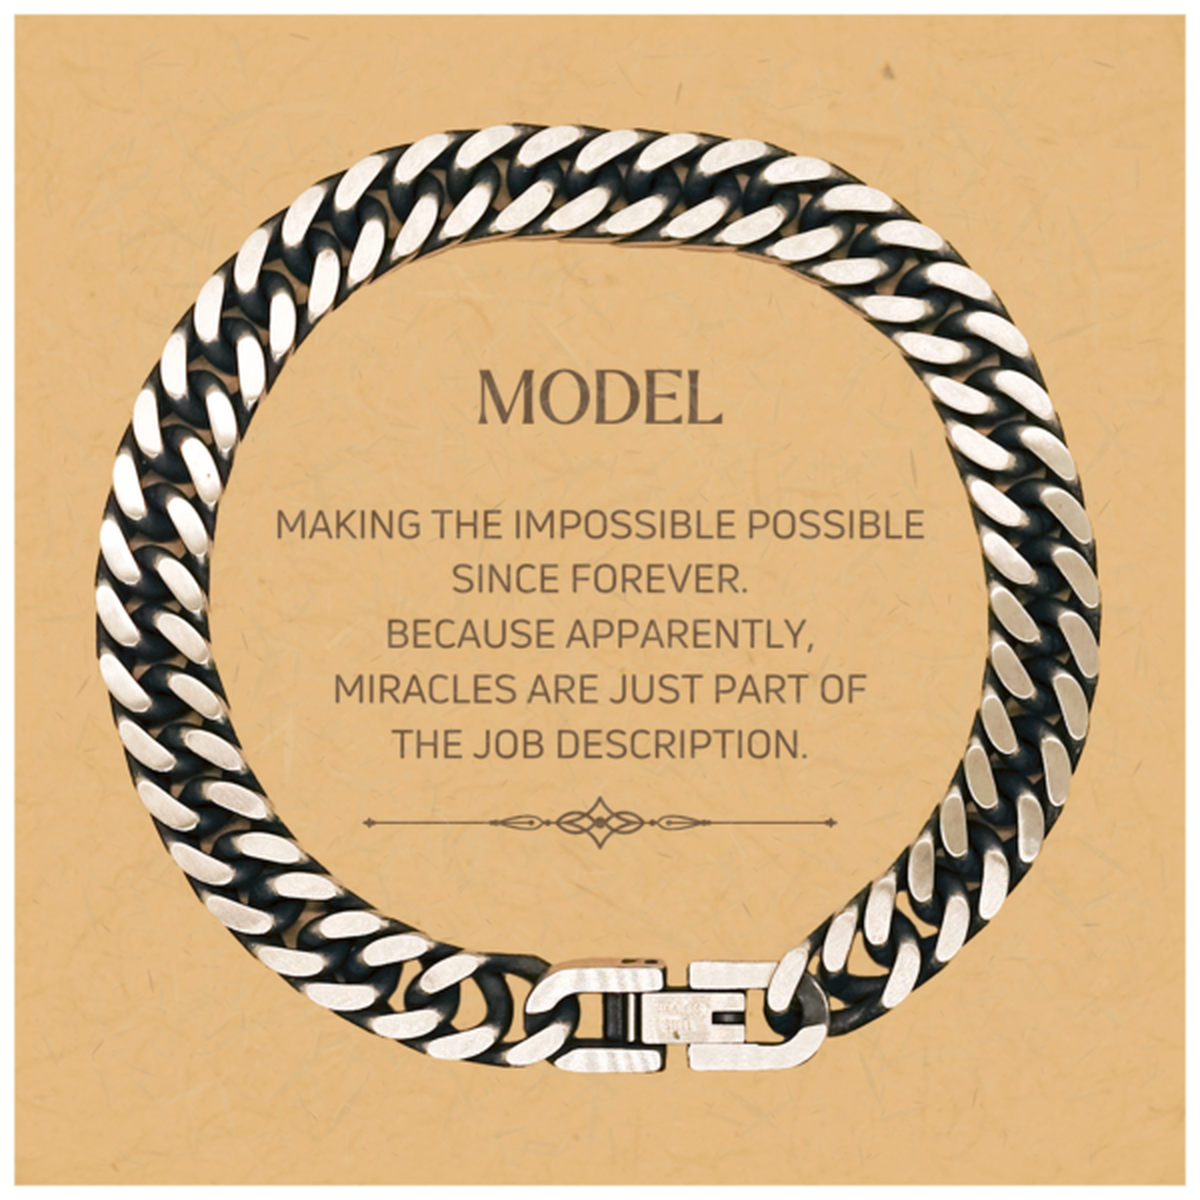 Funny Model Gifts, Miracles are just part of the job description, Inspirational Birthday Christmas Cuban Link Chain Bracelet For Model, Men, Women, Coworkers, Friends, Boss